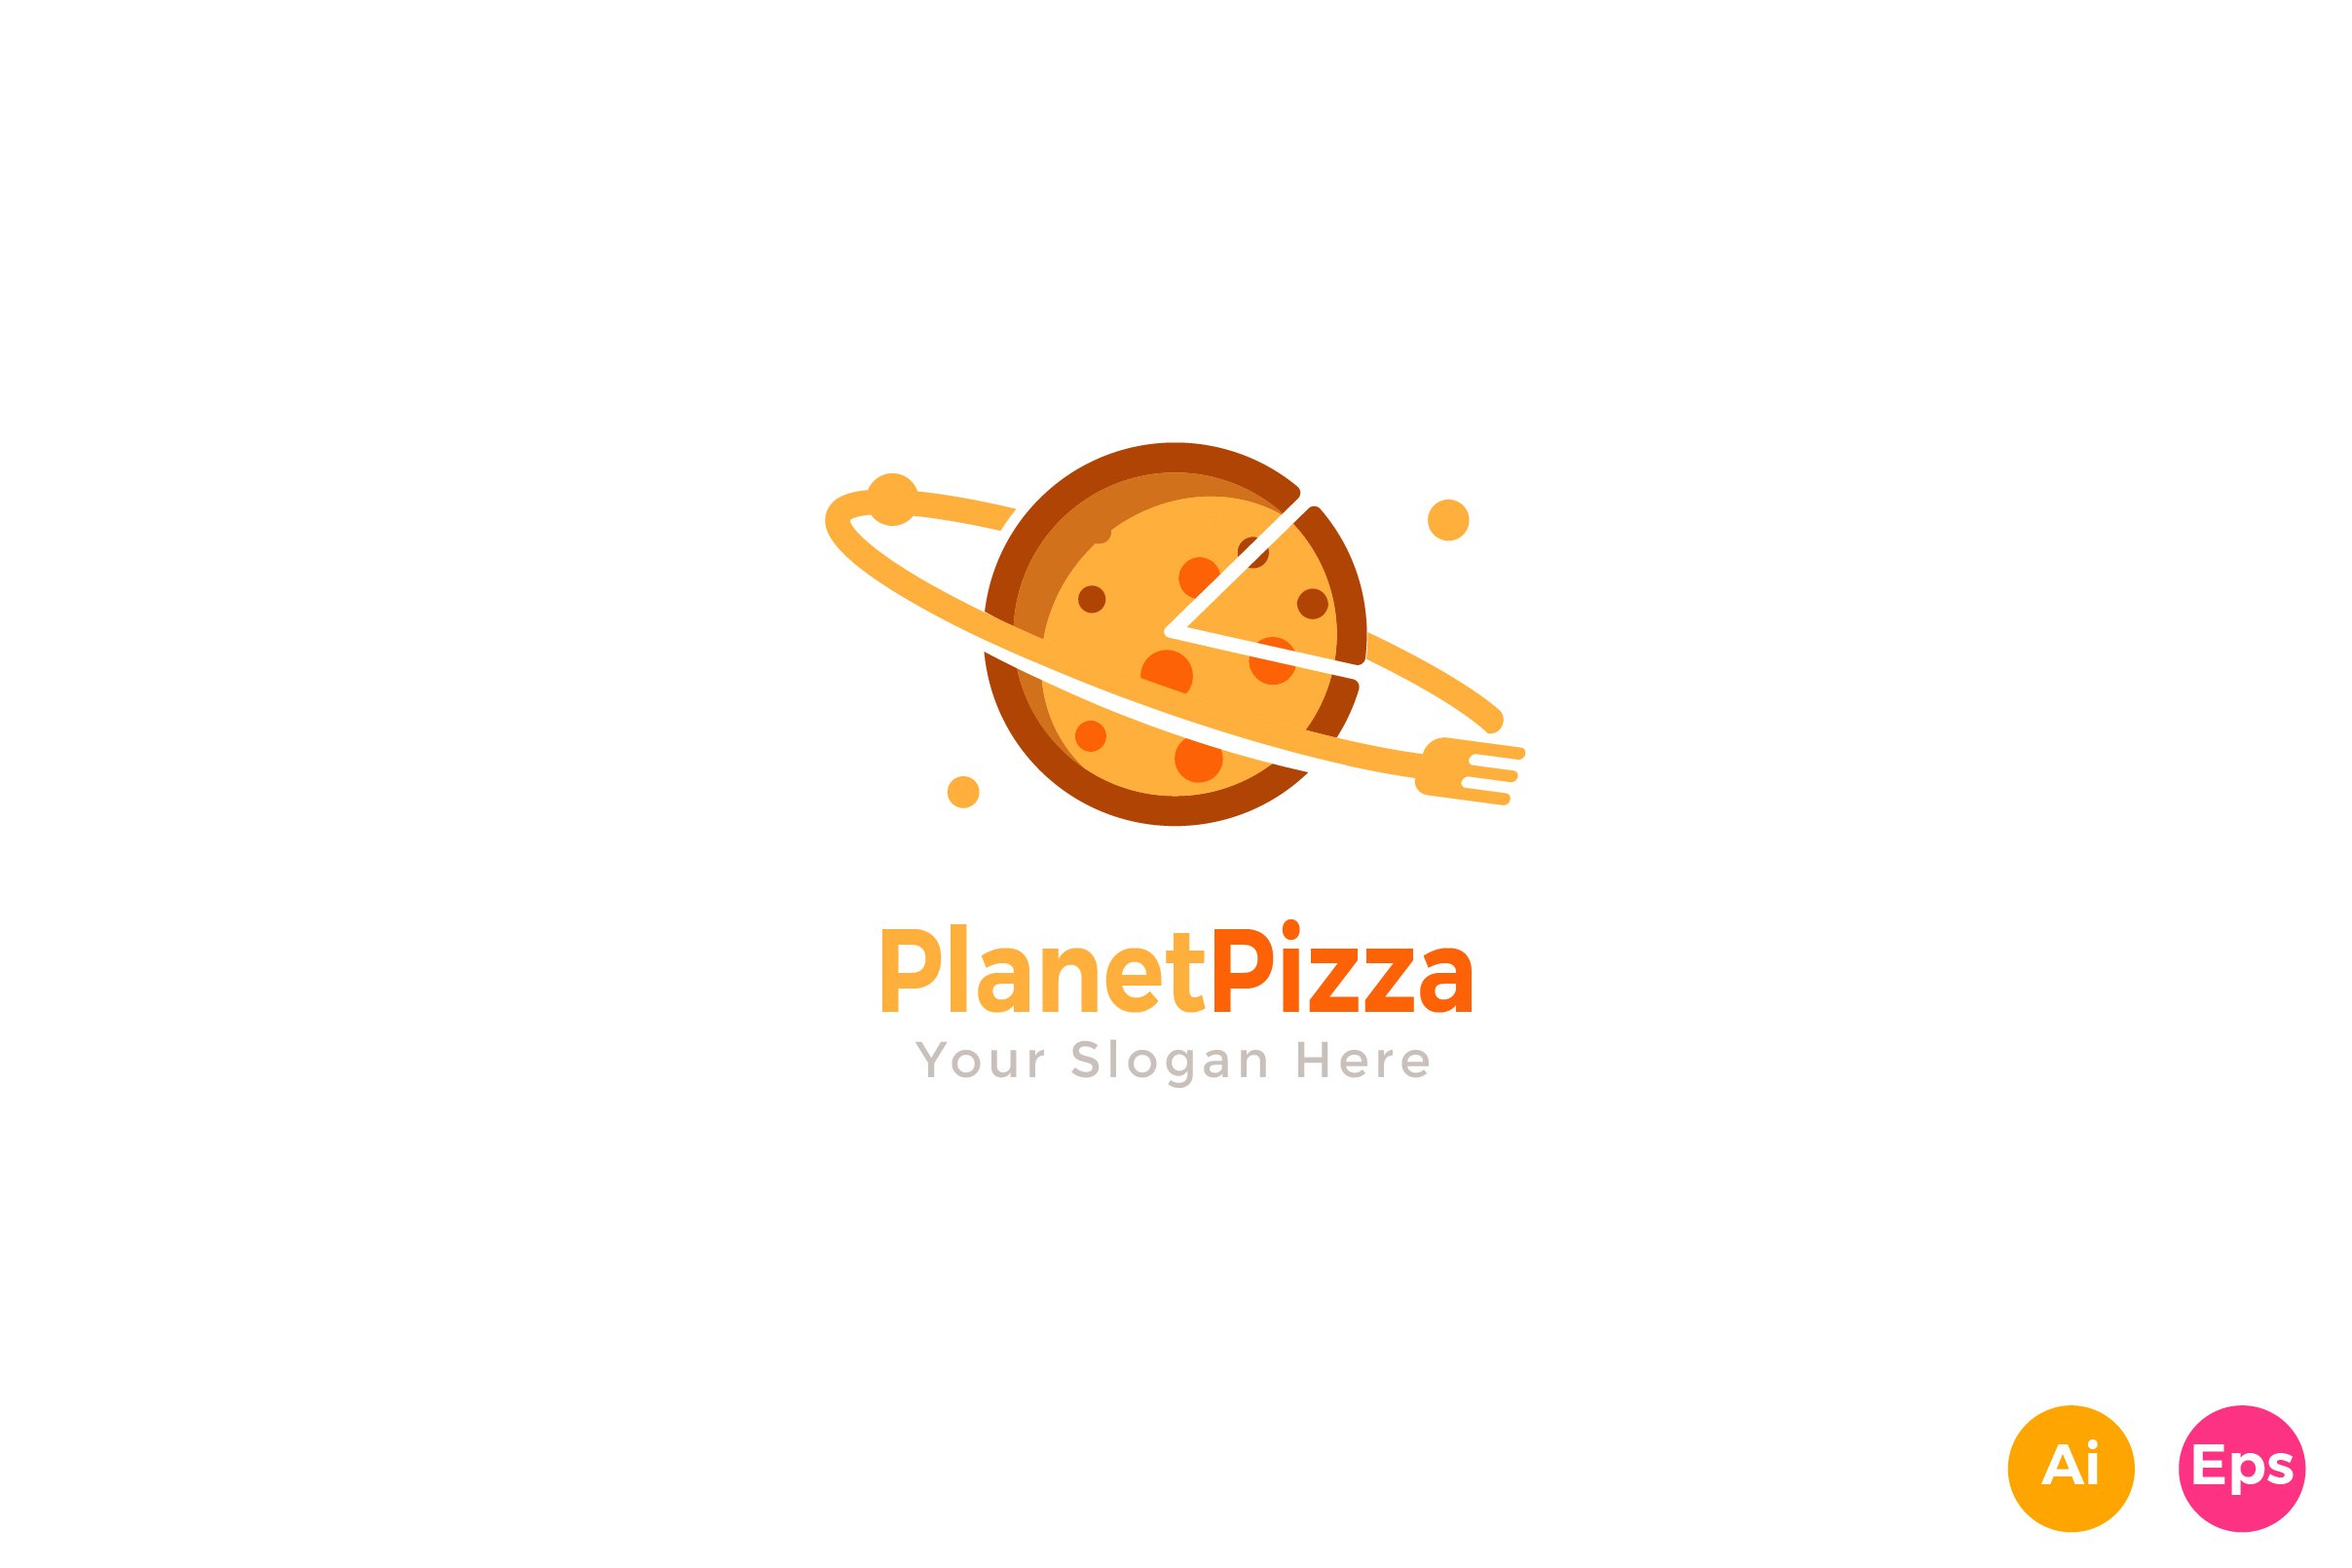 Planet Pizza Fast Food Logo Template cover image.